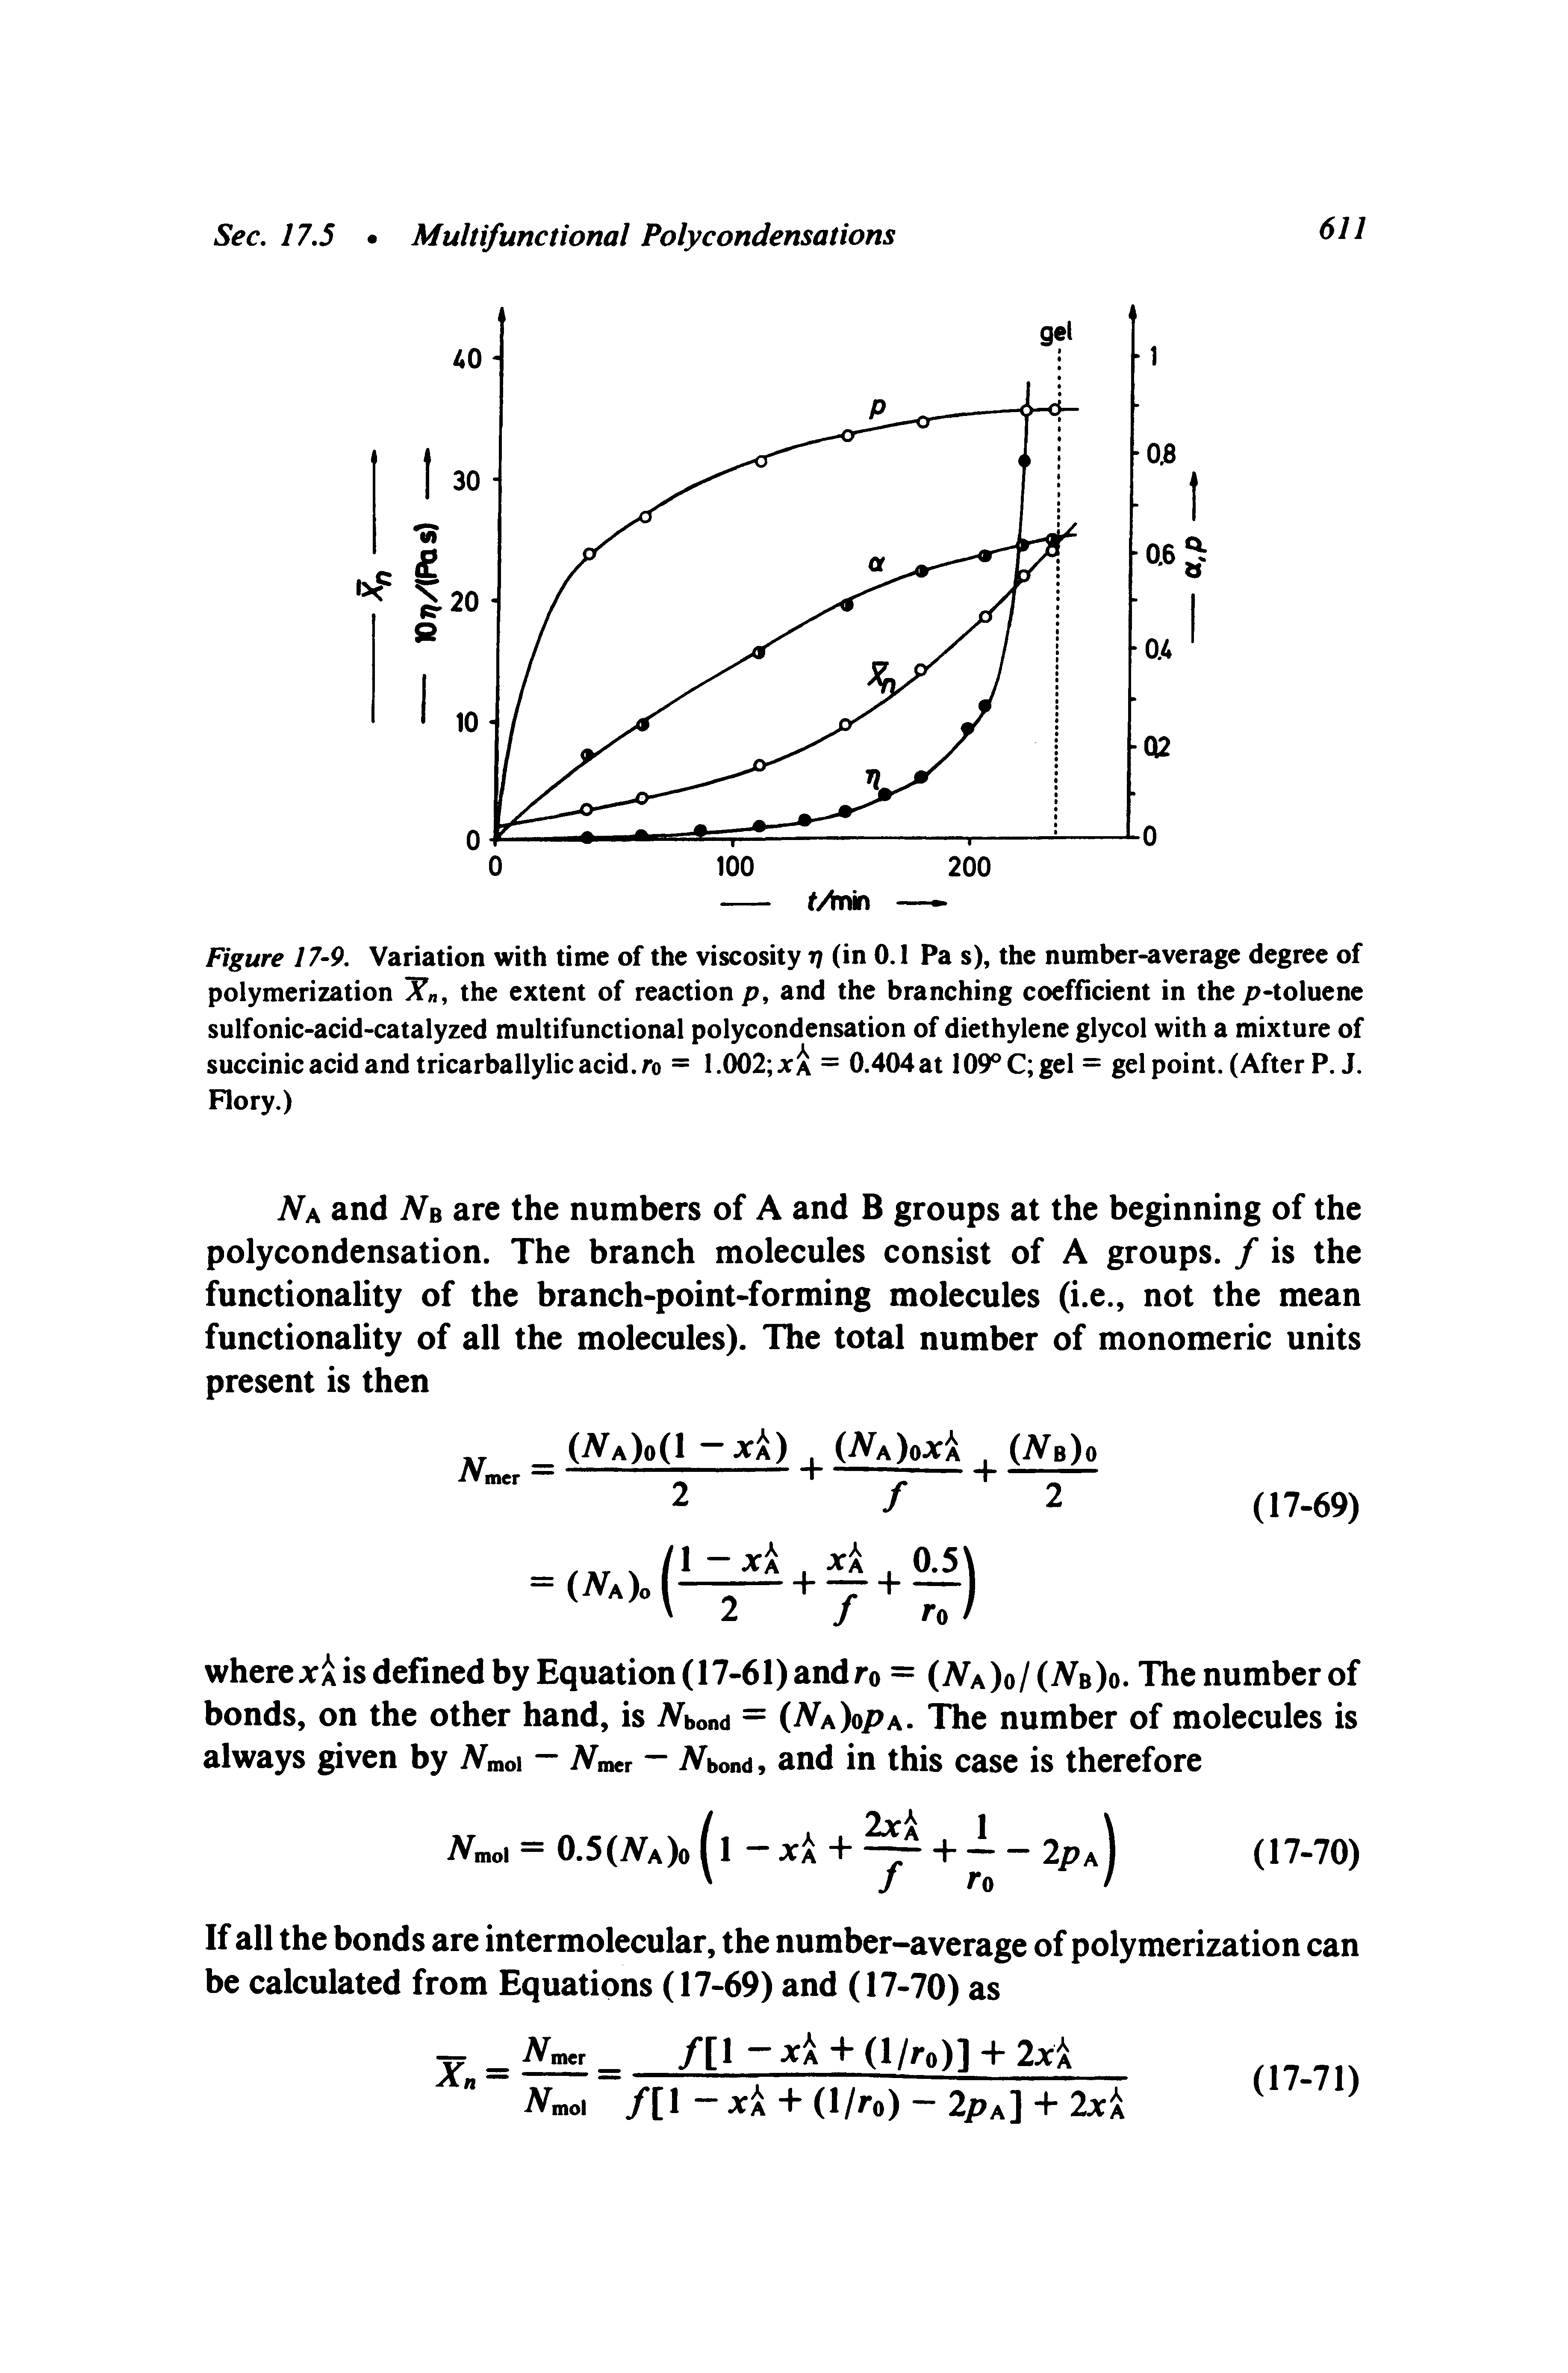 Figure 17-9. Variation with time of the viscosity v (in 0.1 Pa s), the number-average degree of polymerization the extent of reaction p, and the branching coefficient in the p-toluene sulfonic-acid-catalyzed multifunctional polycondensation of diethylene glycol with a mixture of succinic acid and tricarballylic acid, ro = 1.002 xa = 0.404at 109° C gel = gel point. (After P. J. Flory.)...